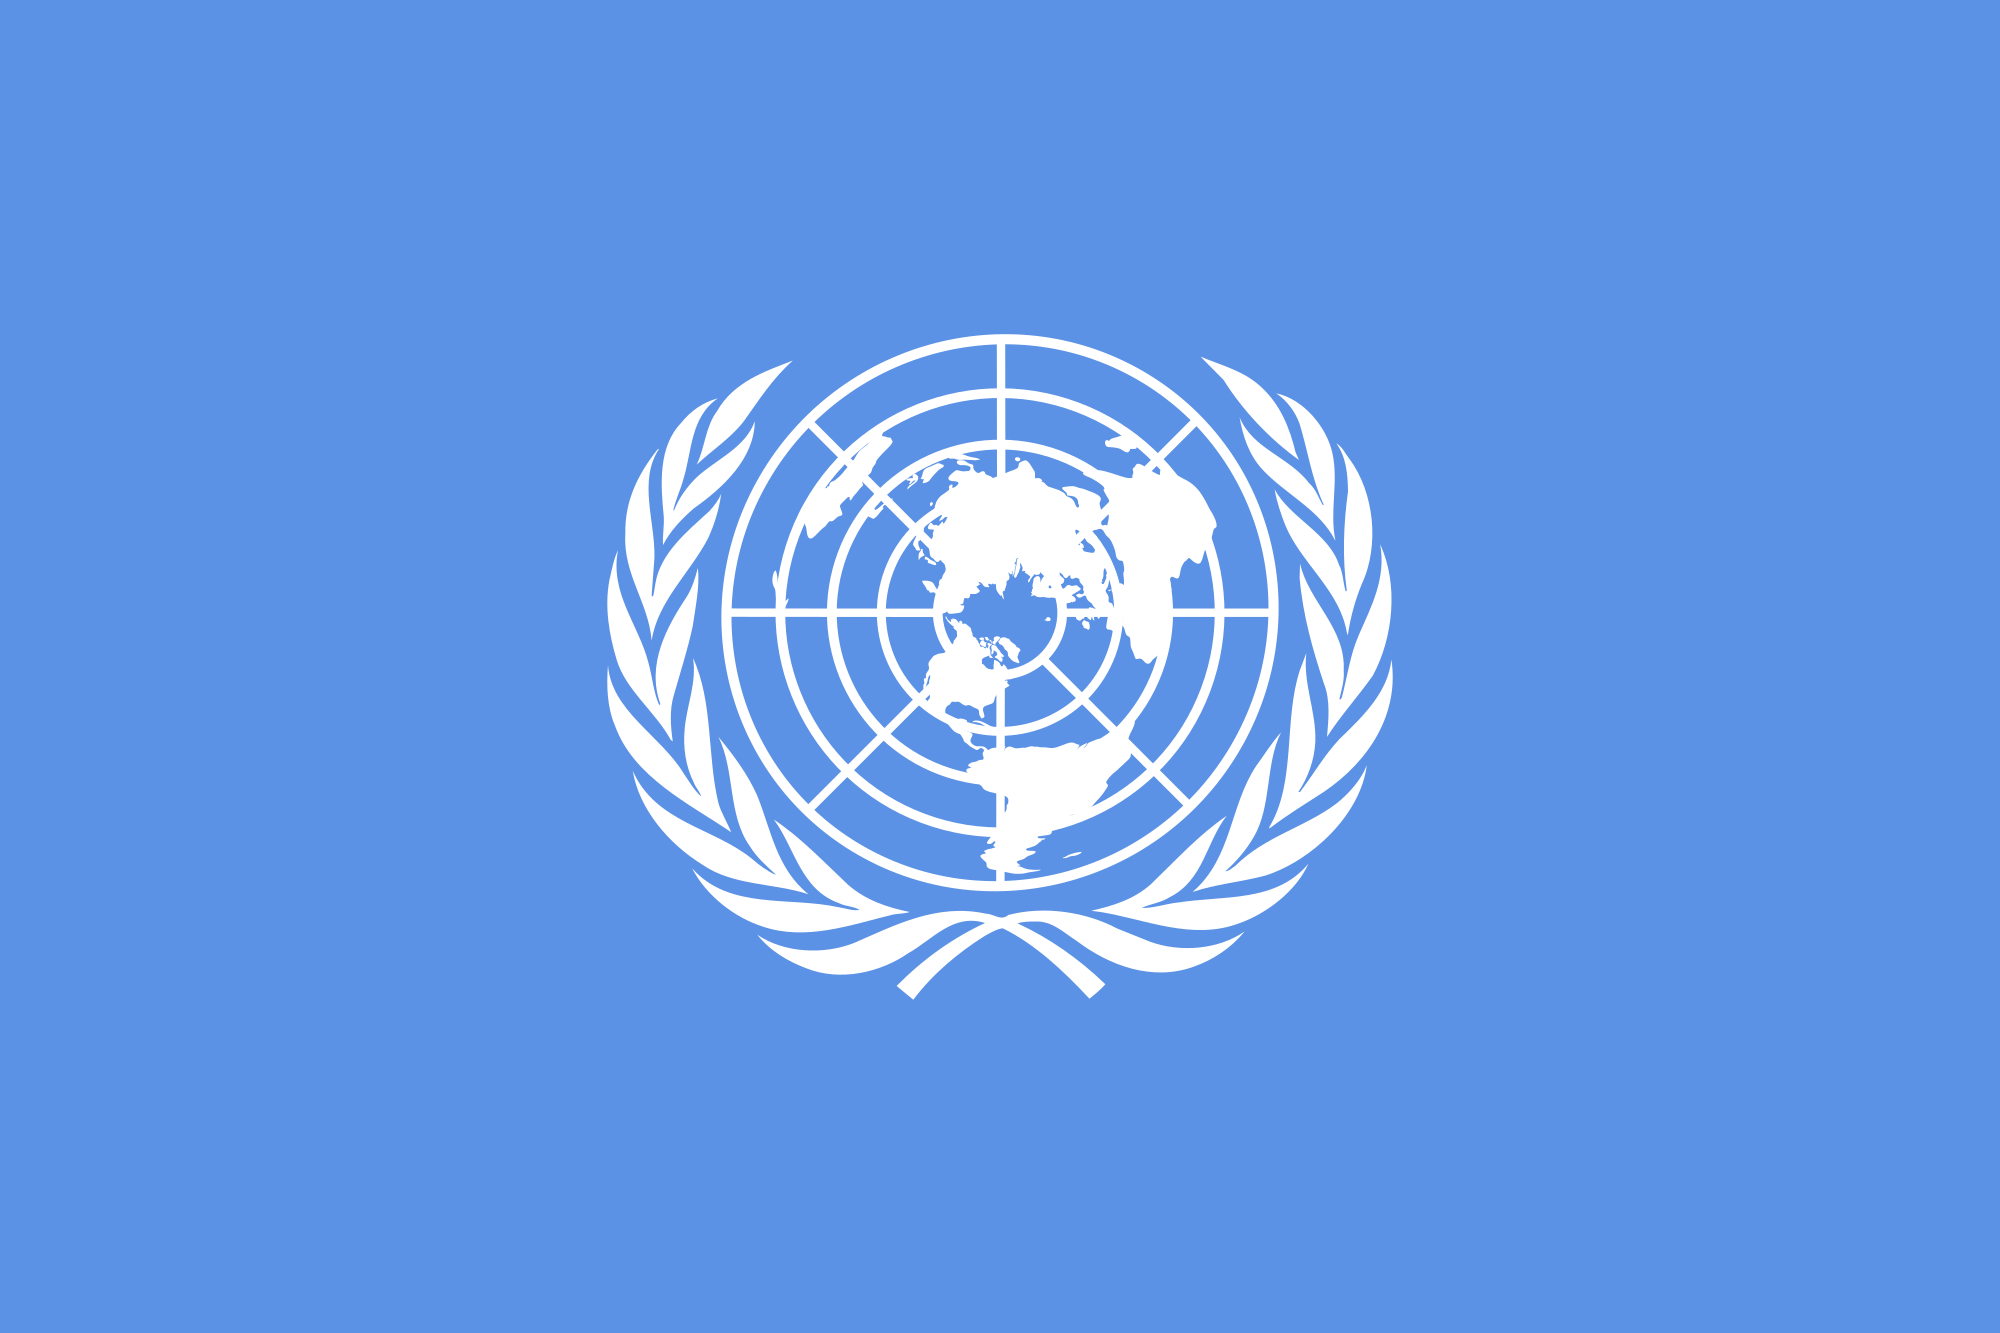 Blue Radar with Wheat Logo - Flag of the United Nations